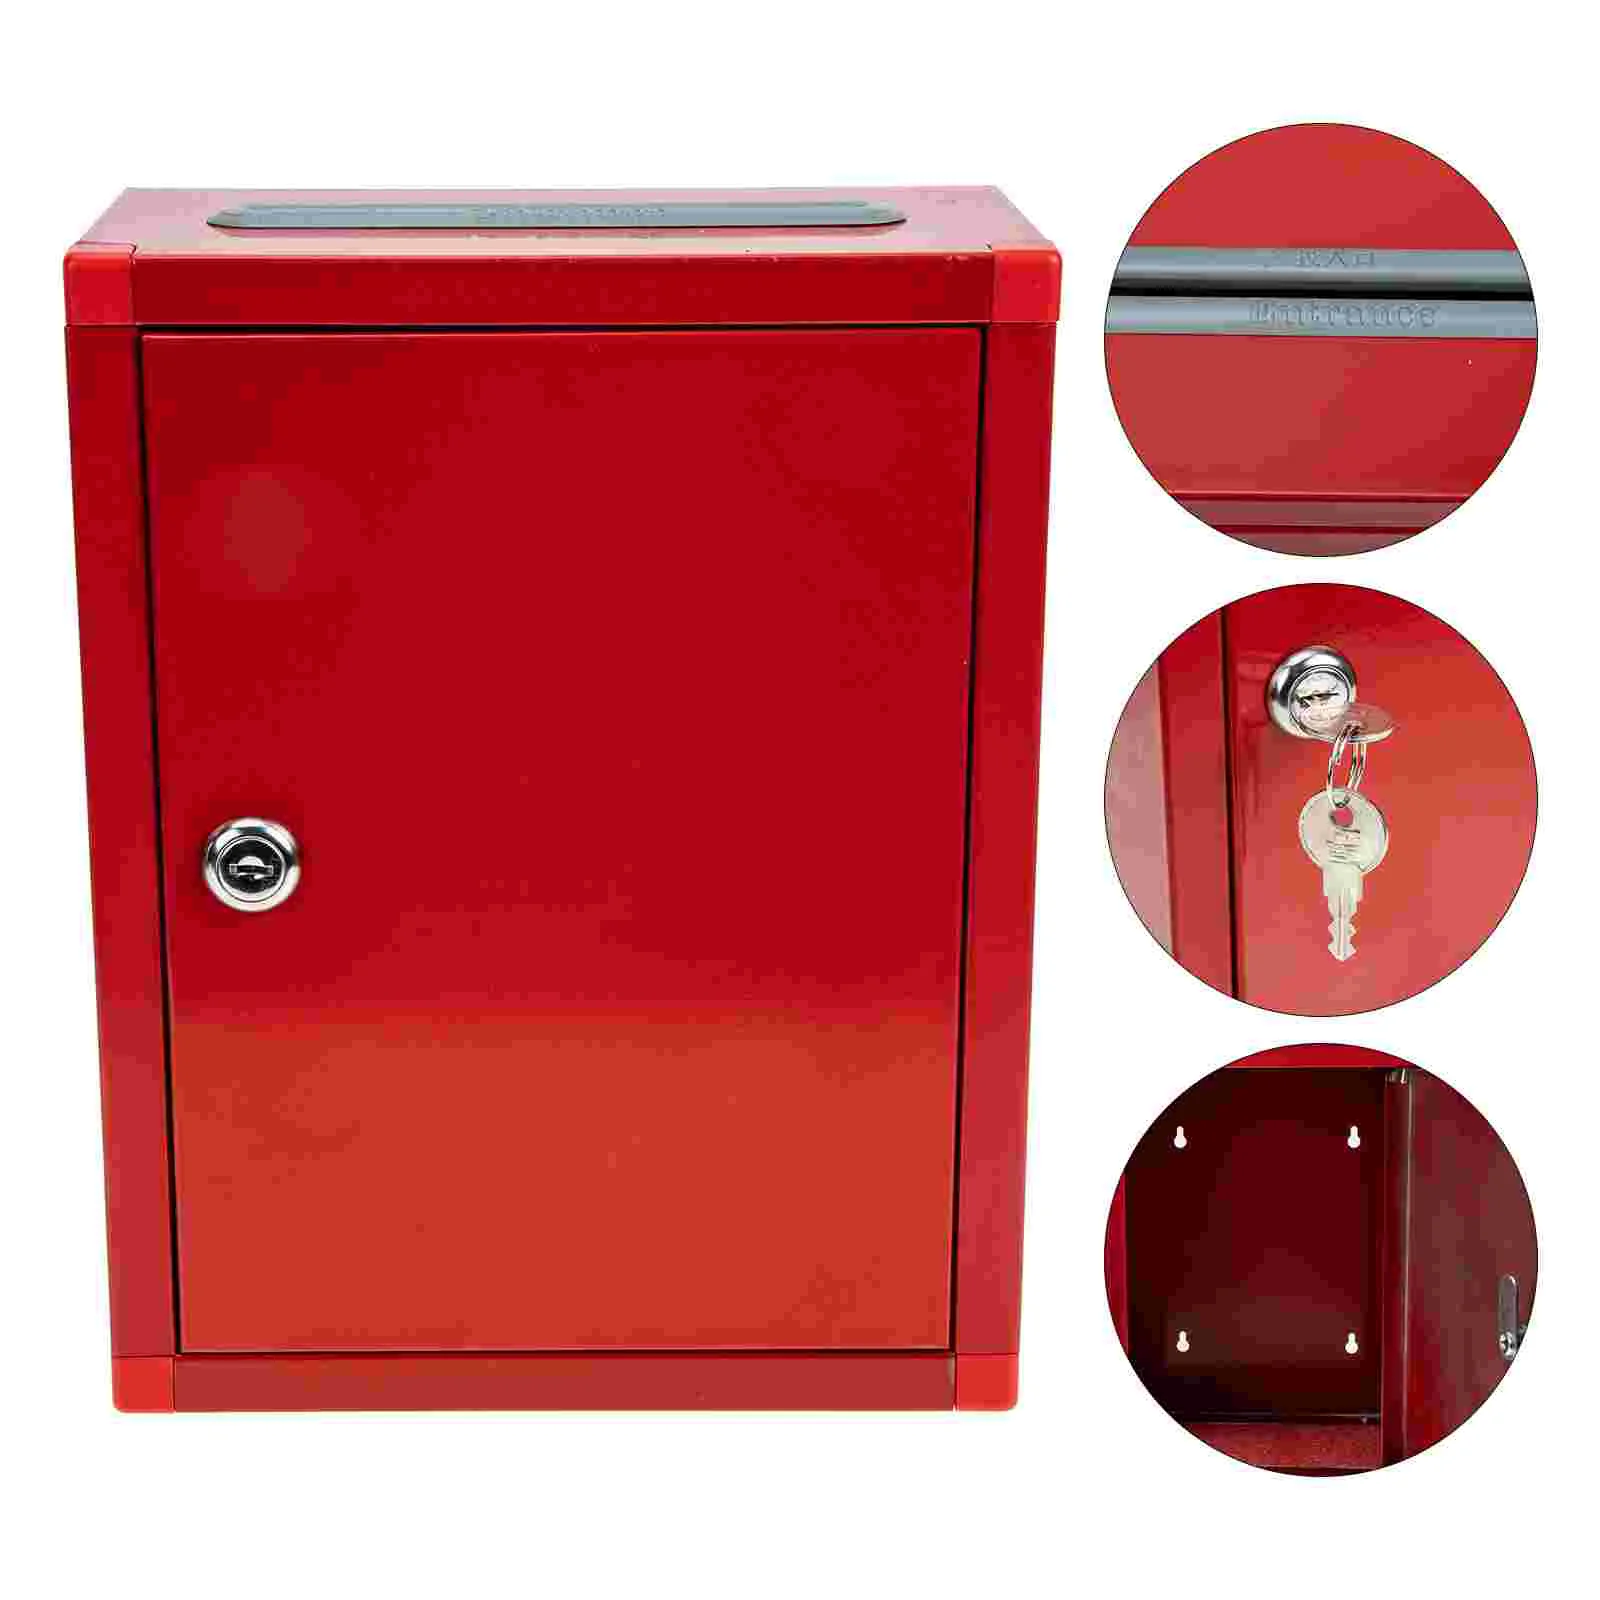 1 Set Public Fundraising Box Office Letter Box Stainless Steel Donation Box with Keys